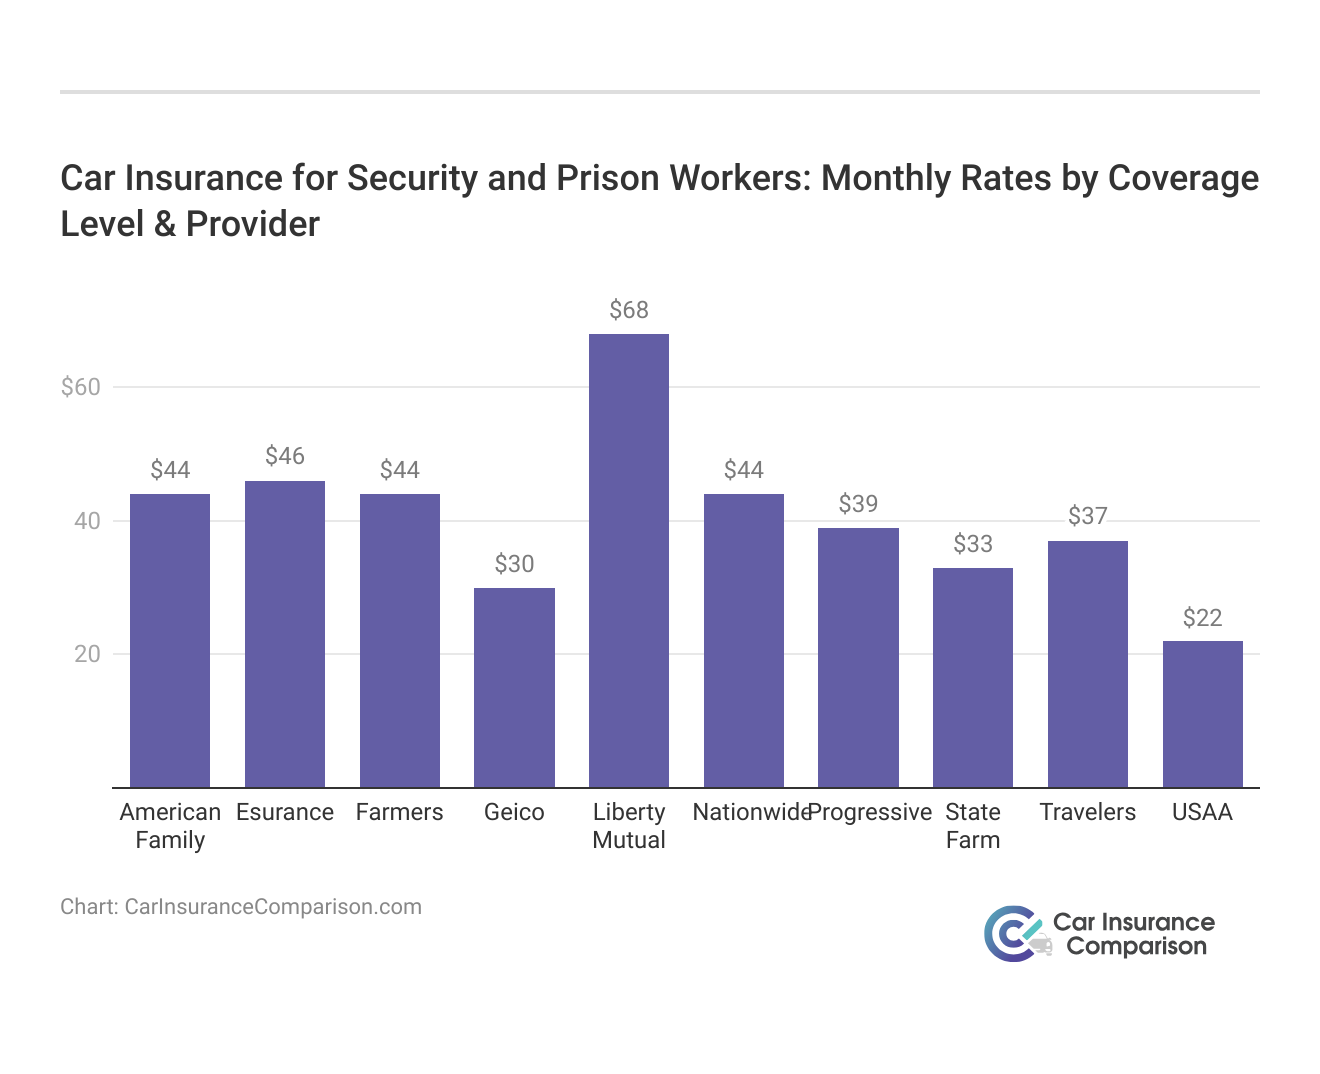 <h3>Car Insurance for Security and Prison Workers: Monthly Rates by Coverage Level & Provider</h3>